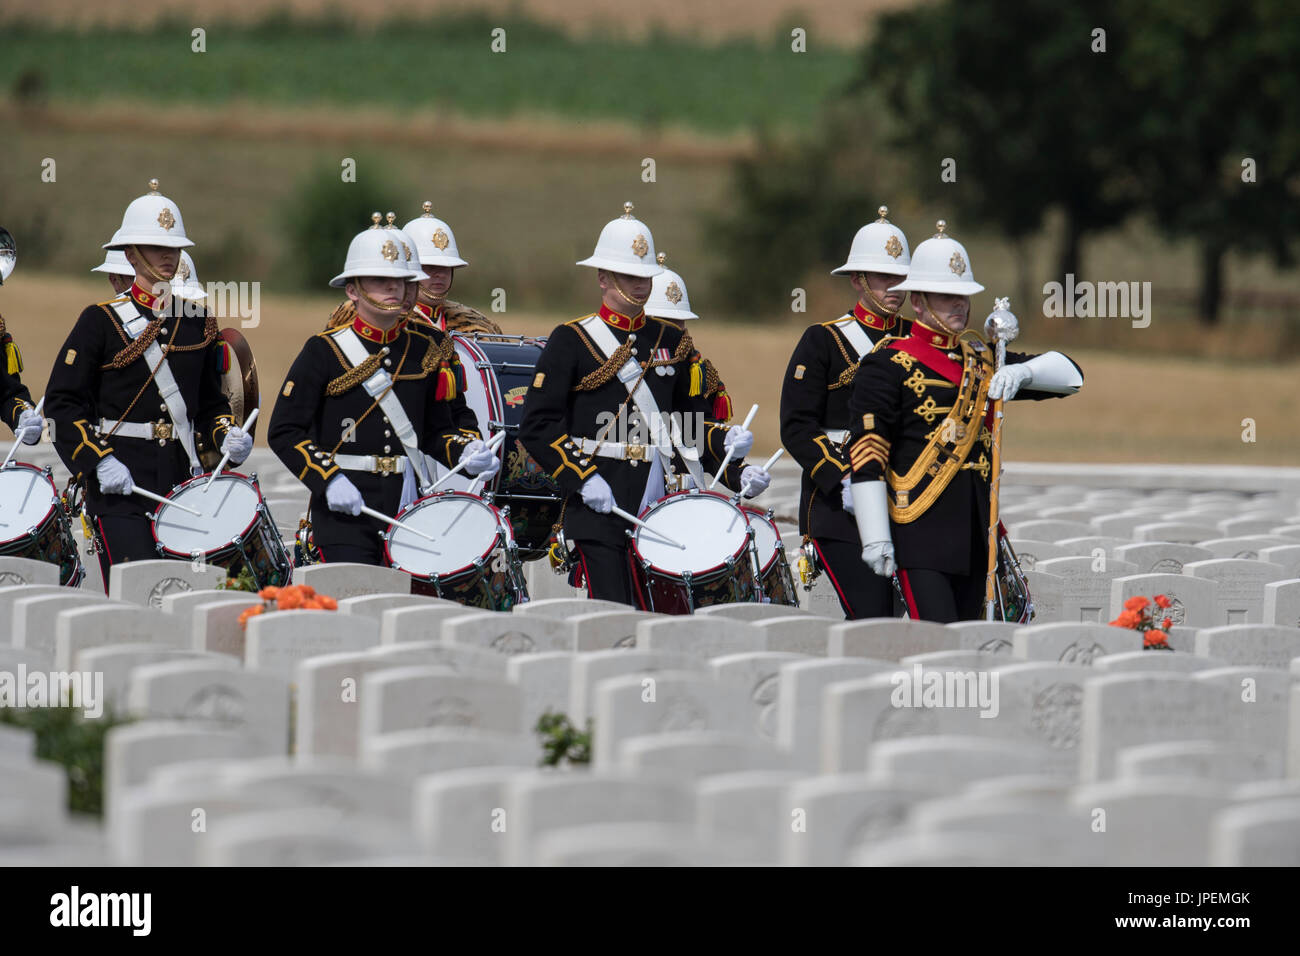 British Troops take part in the commemoration events for the World War One Battle of Passchendaele at the Tyne Cot Cemetery near Ypres in Belgium. The military band of the Marines Stock Photo